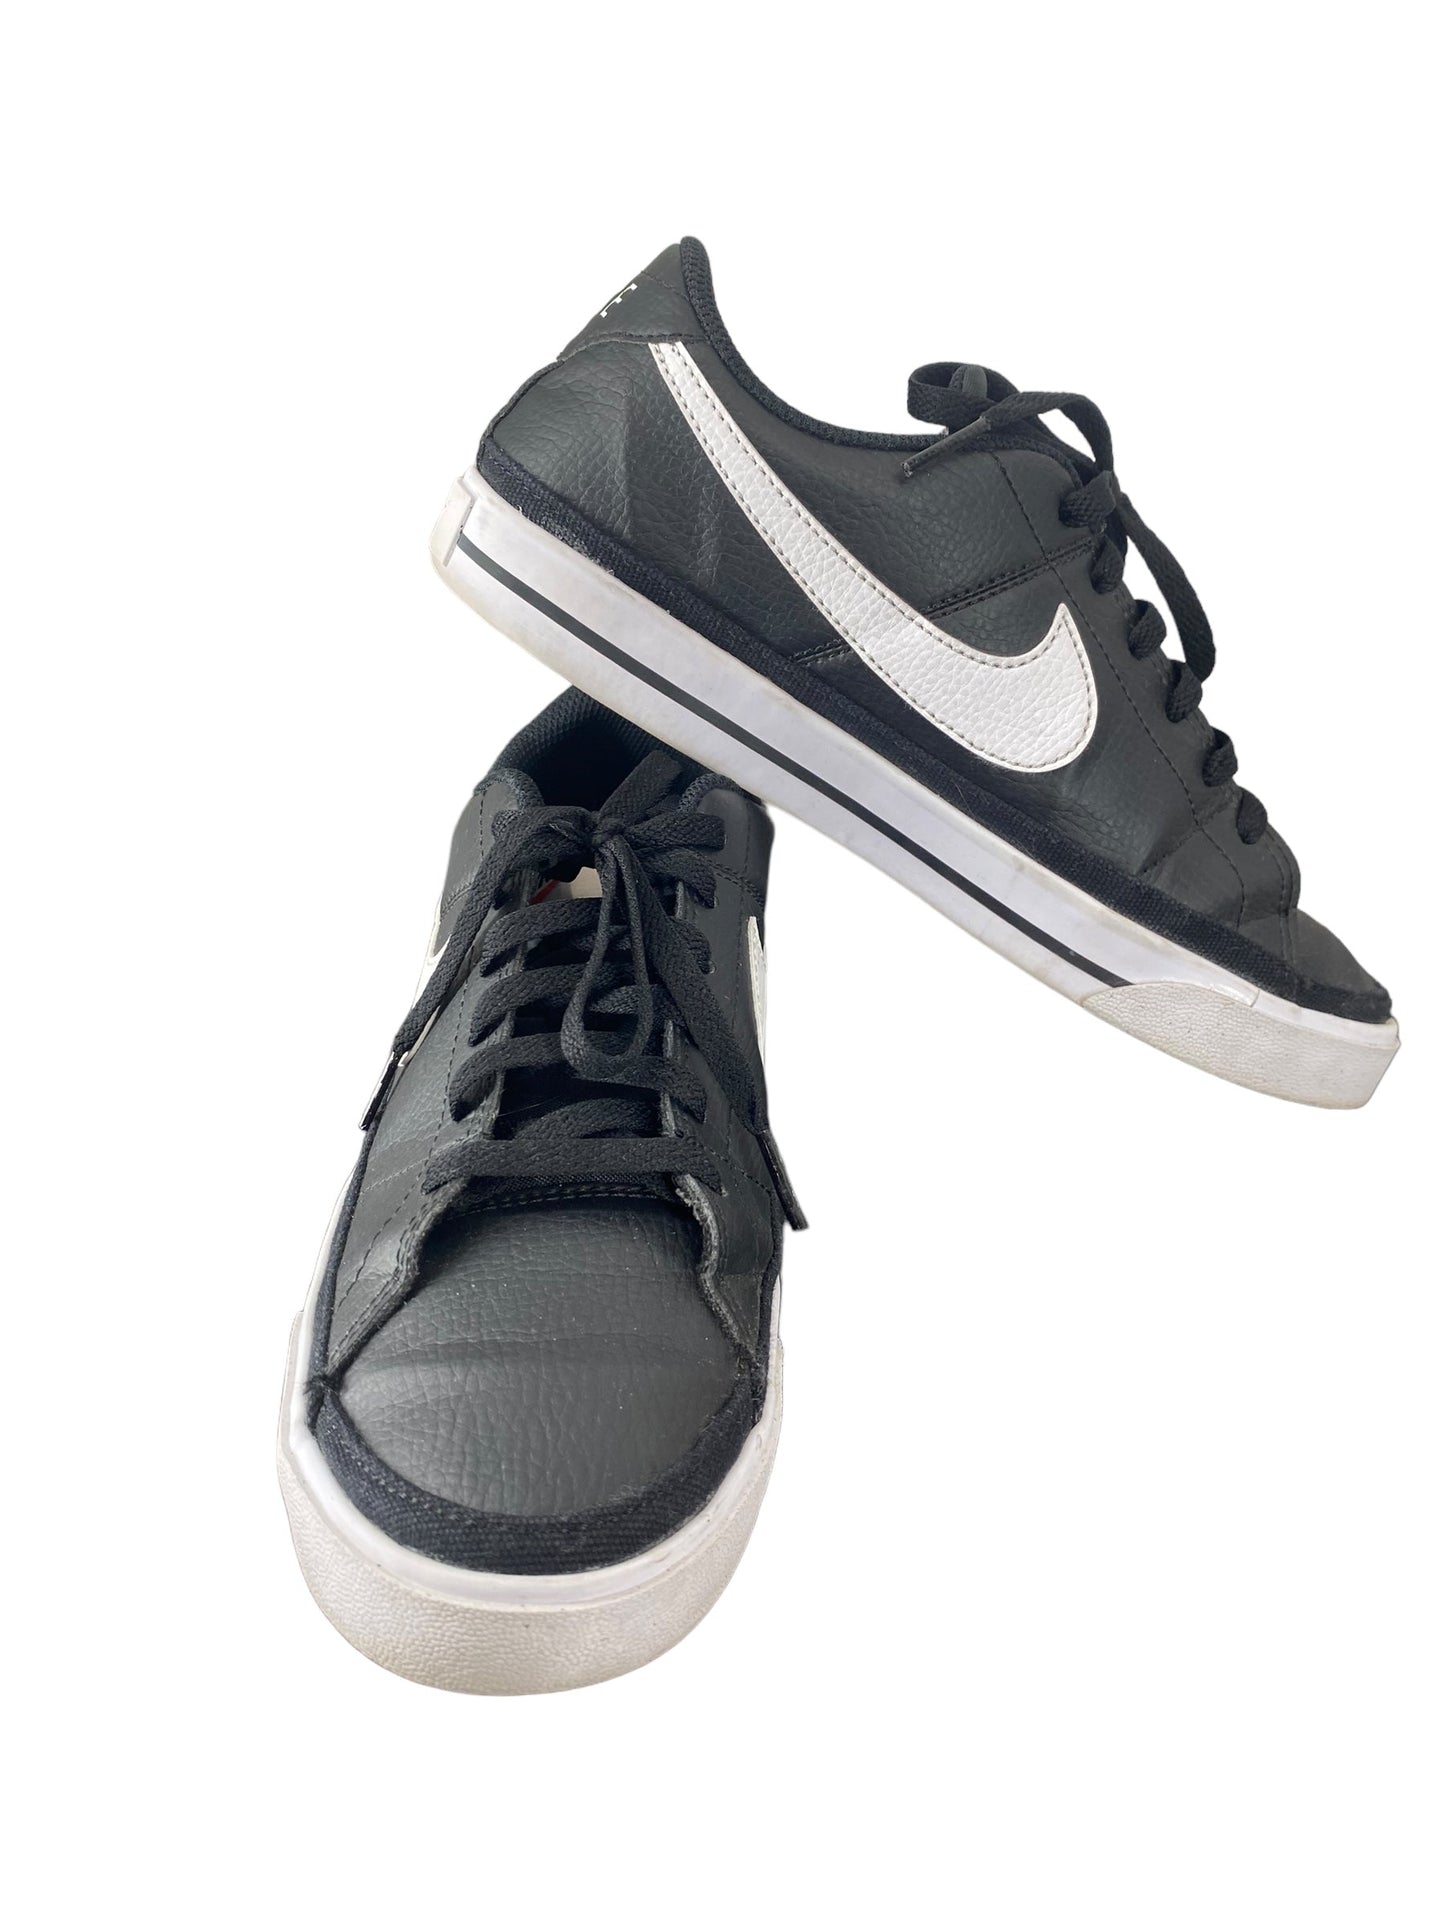 Black Shoes Sneakers Nike, Size 8